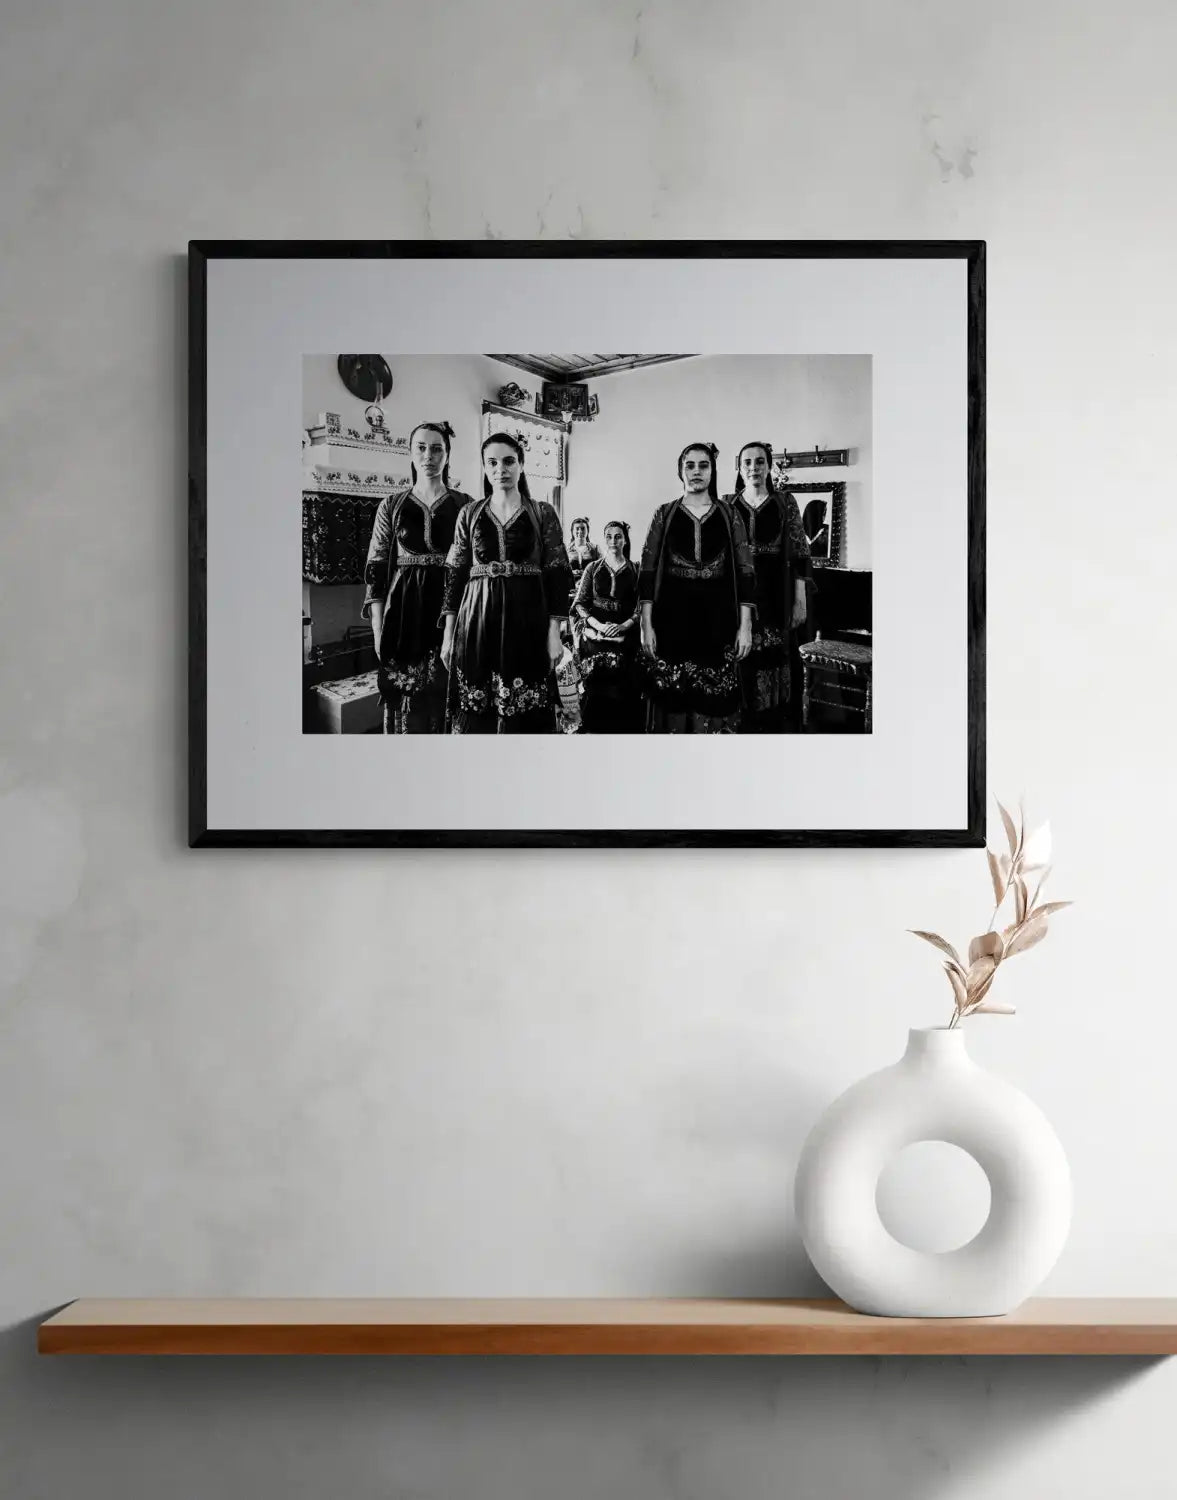 Metsovo, Epirus, Greece | Costumes next to Fireplace | Black-and-White Wall Art Photography - single print framed